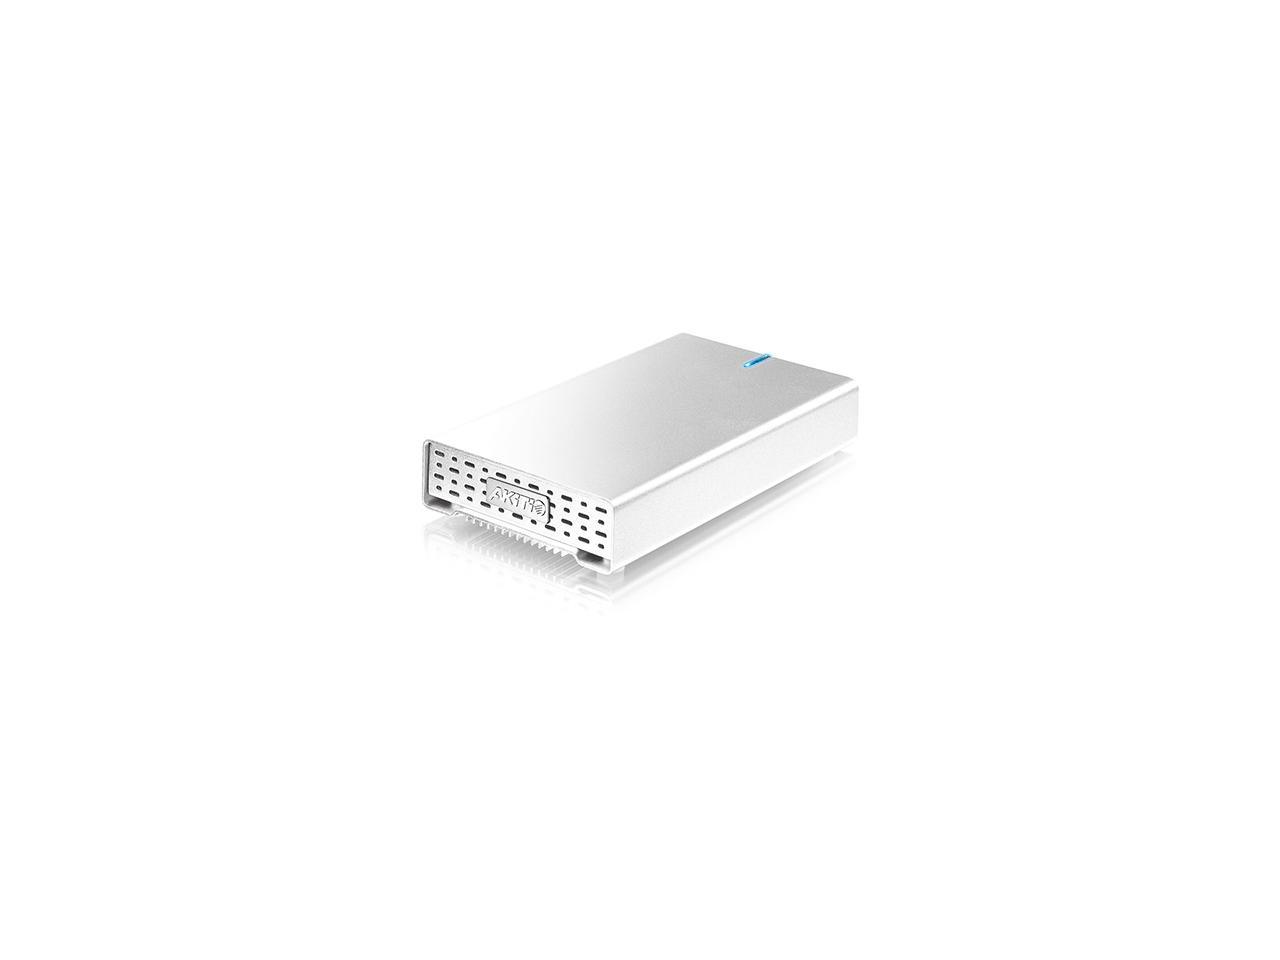 AKiTiO Neutrino 1.0TB U3 Bus-Powered Portable Drive. External Bus-Powered Storage. USB 3.0 SuperSpeed Interface .Backwards Compatible With USB 2.0. Includes USB Cable. Model AKTSK2U3ASH